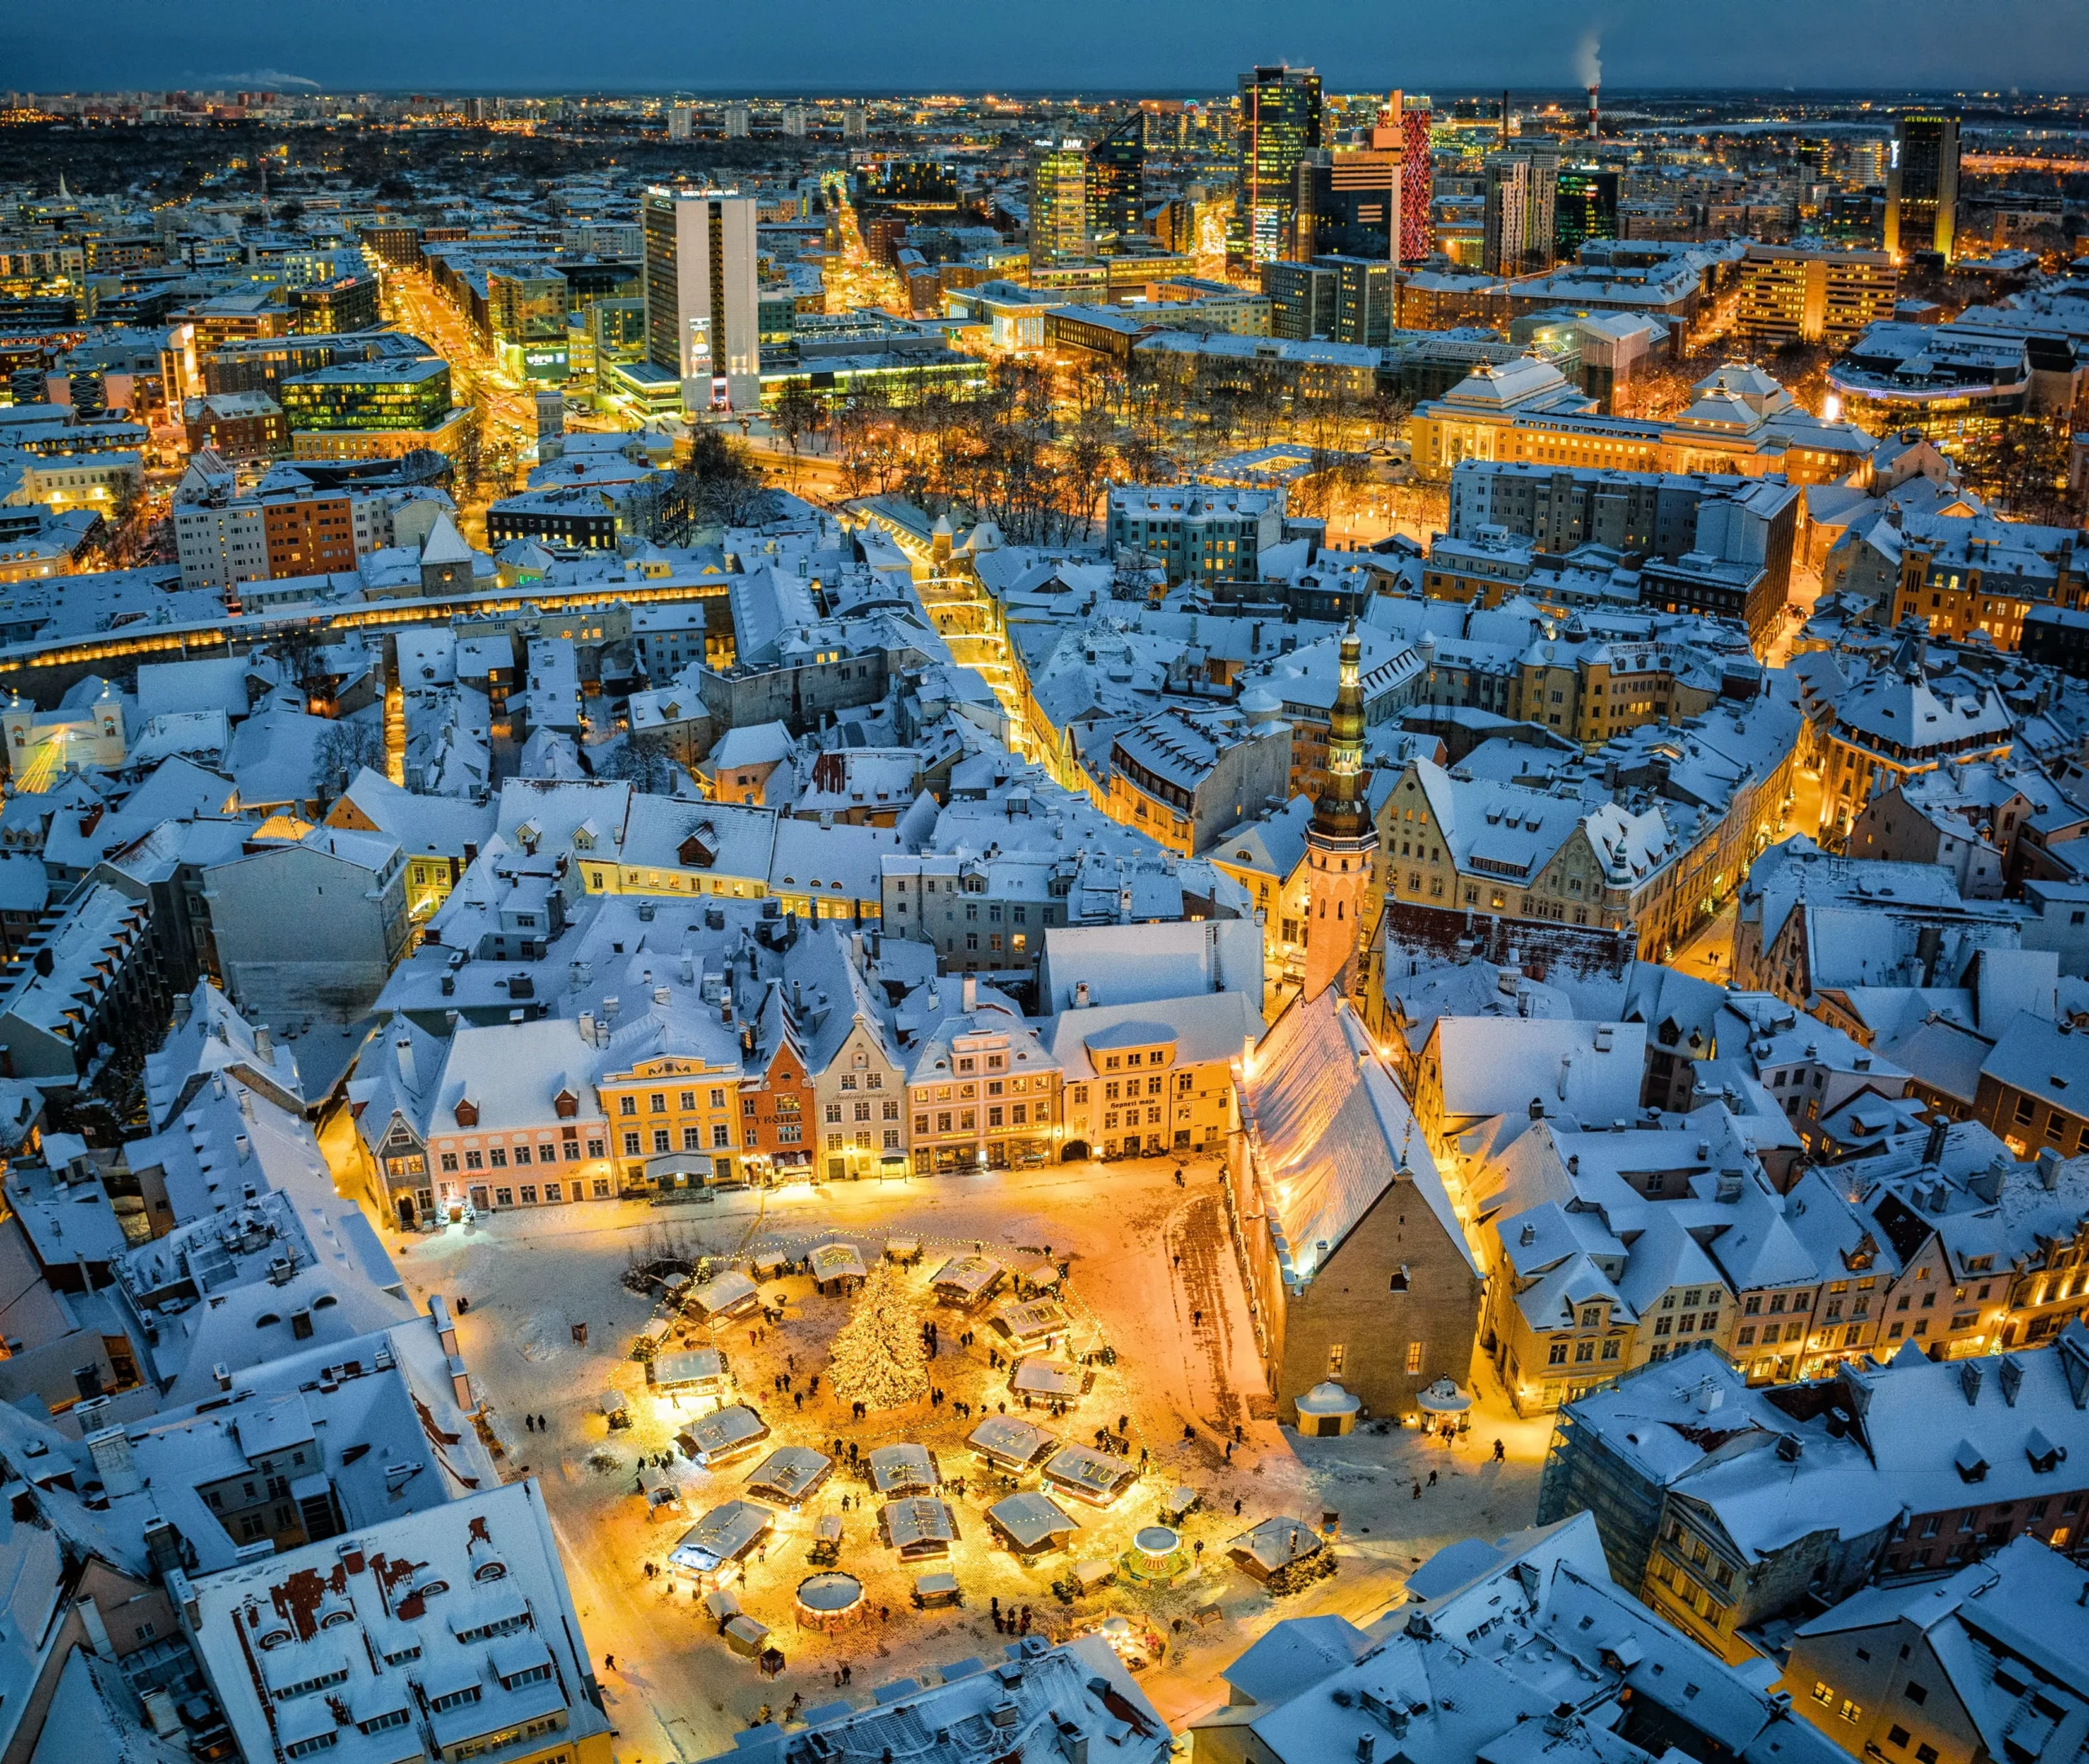 Tallinn Christmas Markets, a view of the illuminated city from above